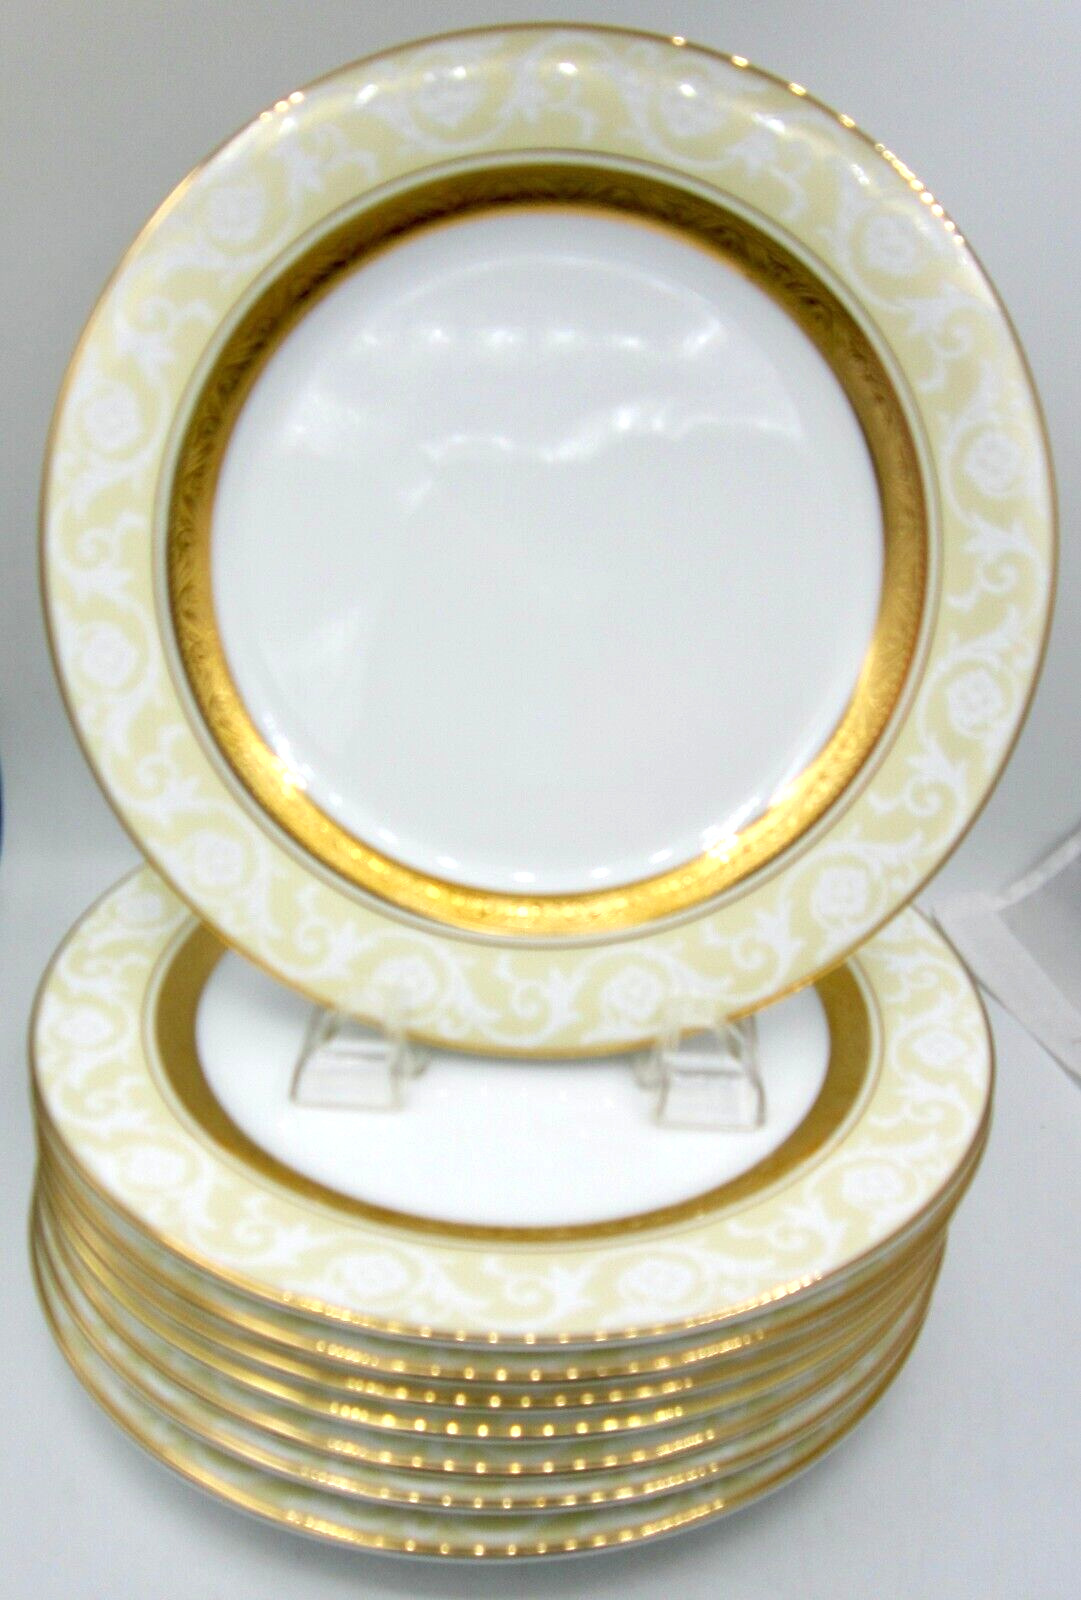 Noritake Majestic Gold (4290) China Accent Luncheon Plates (8) - England